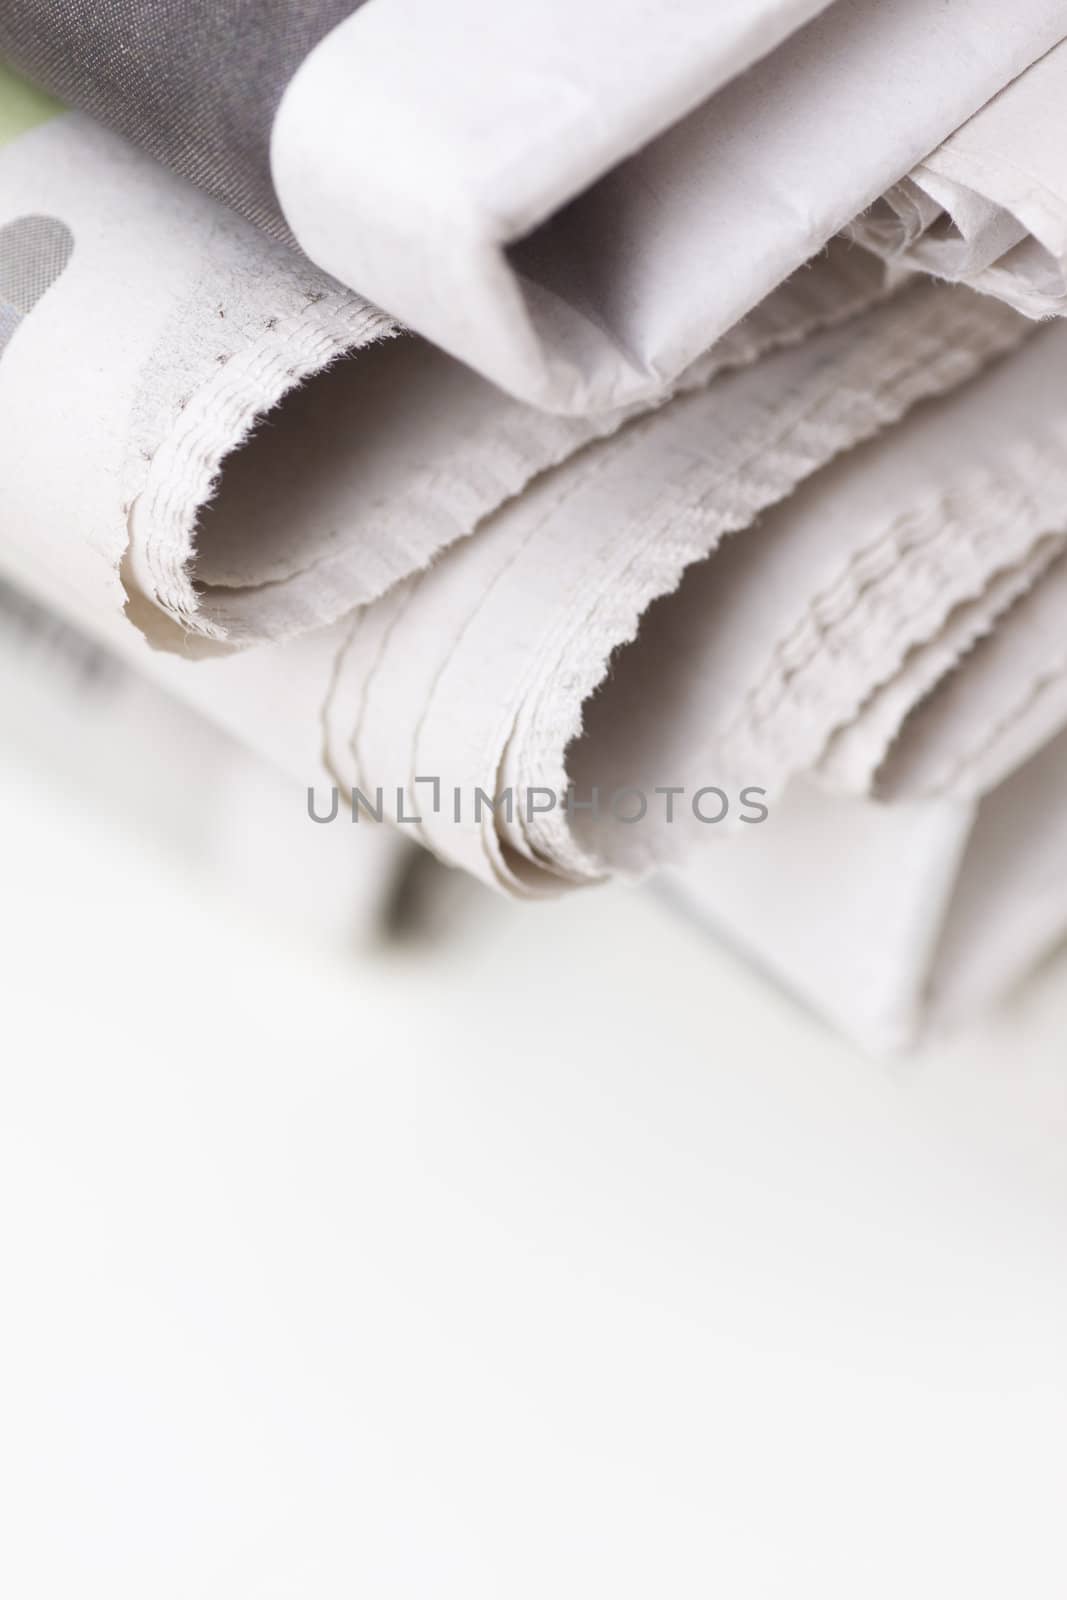 pile of newspapers on white table